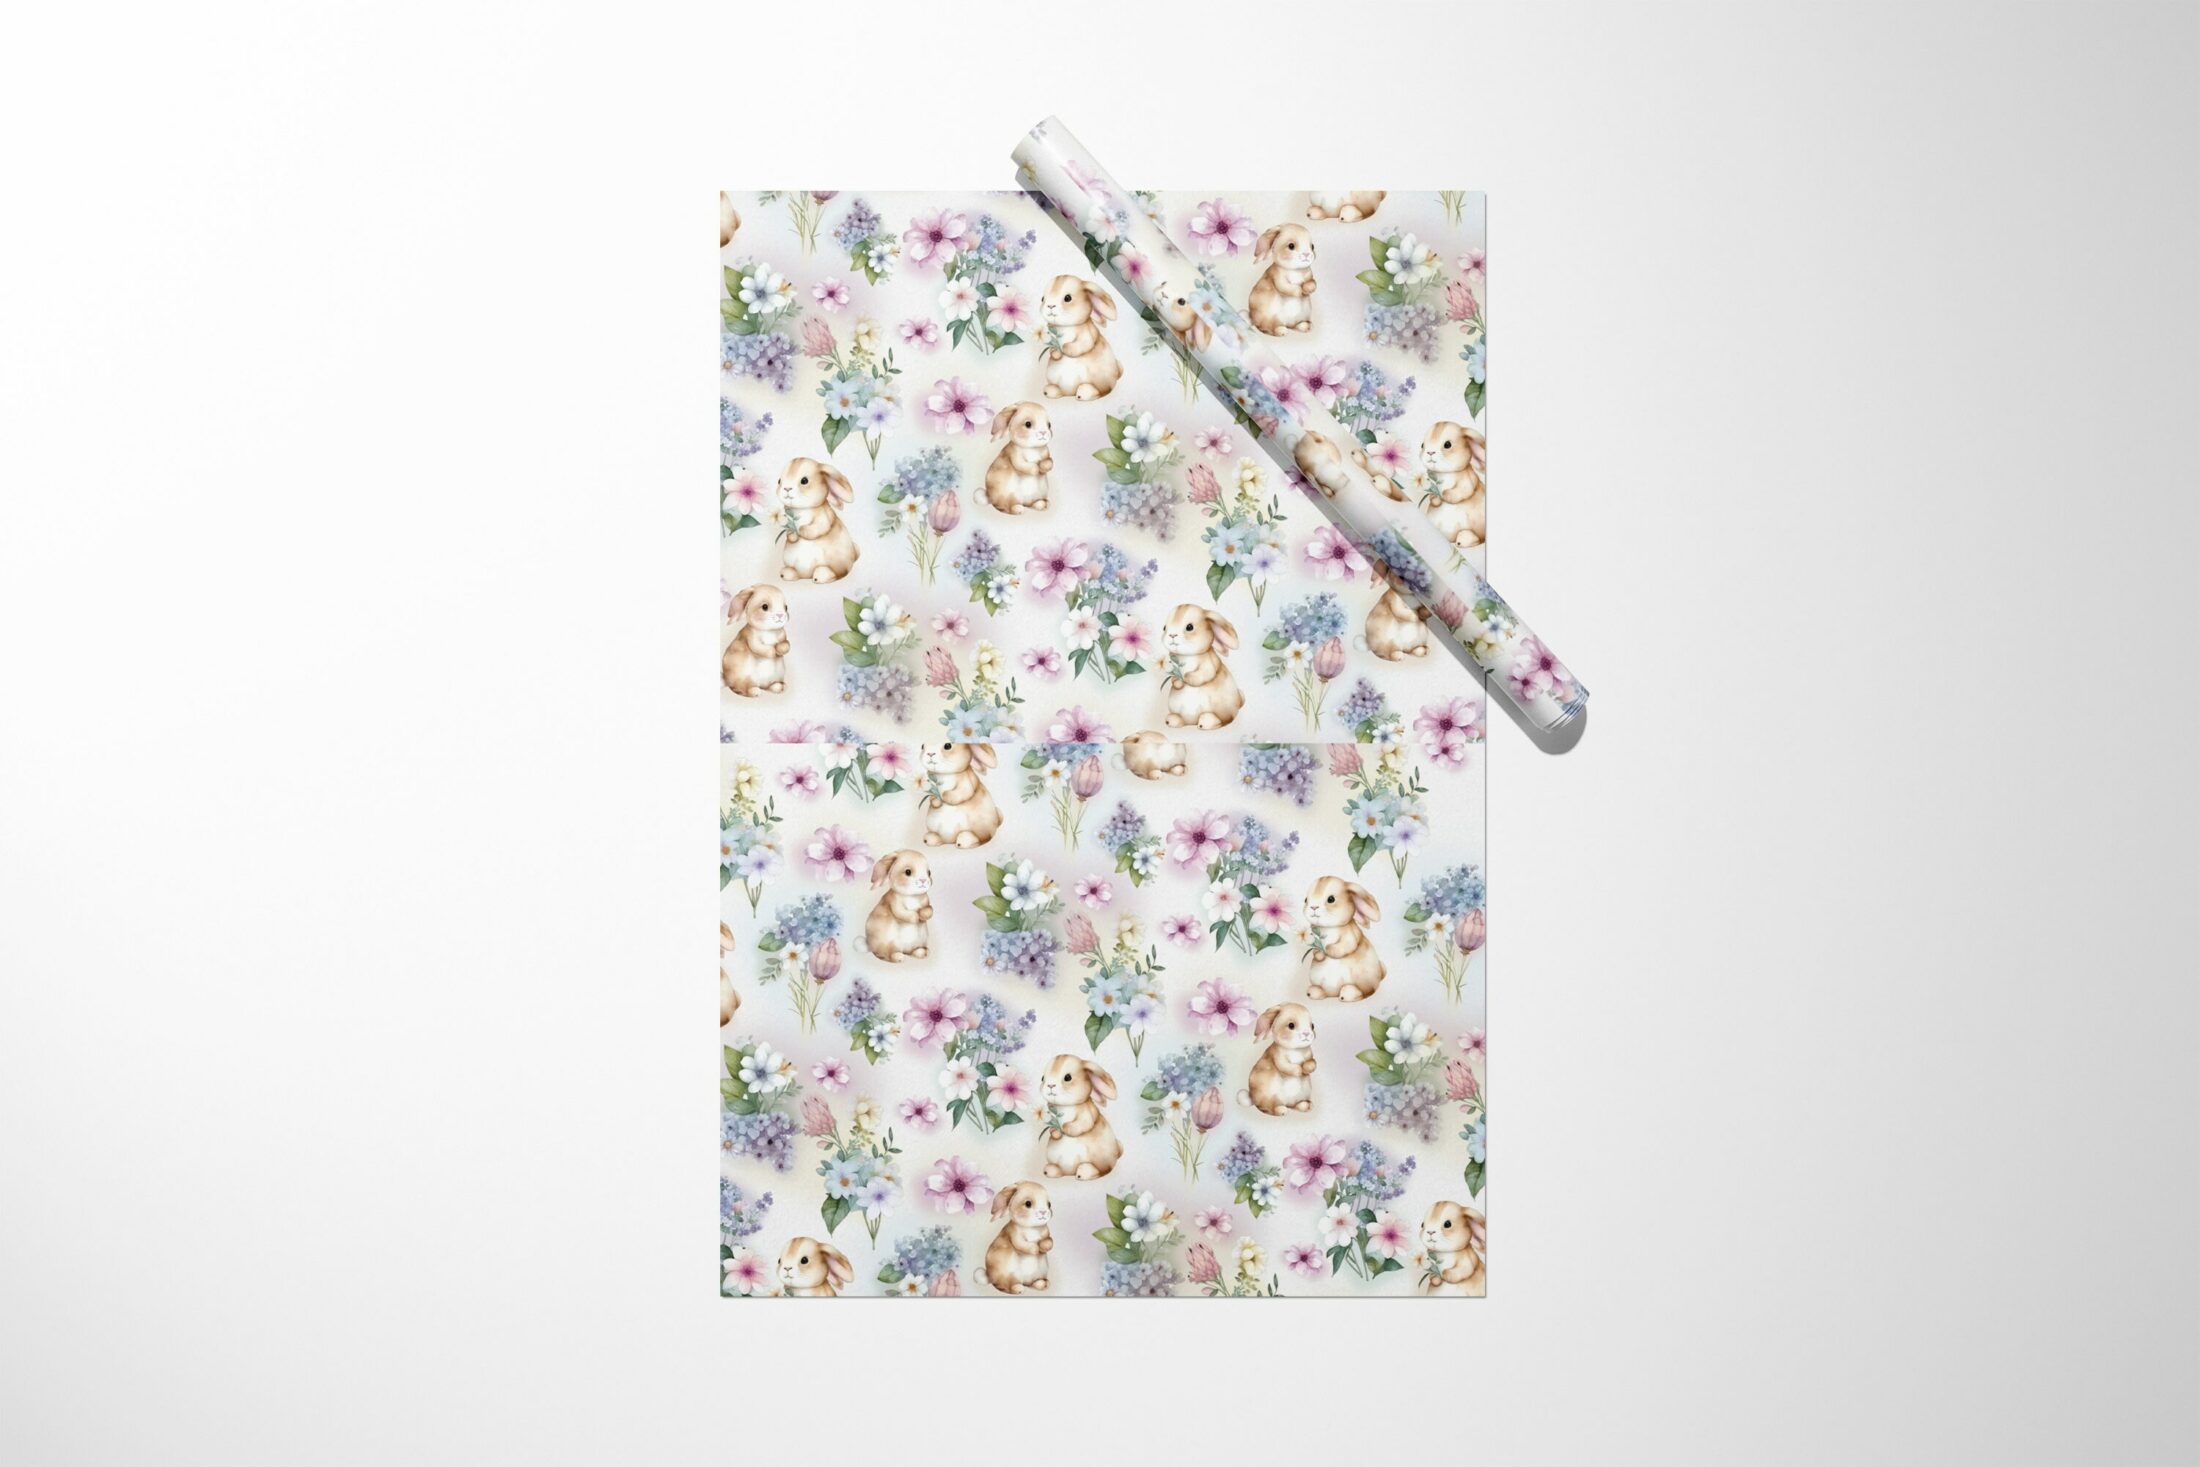 A unique Bunny and Floral Wrapping Paper with a floral pattern on it.